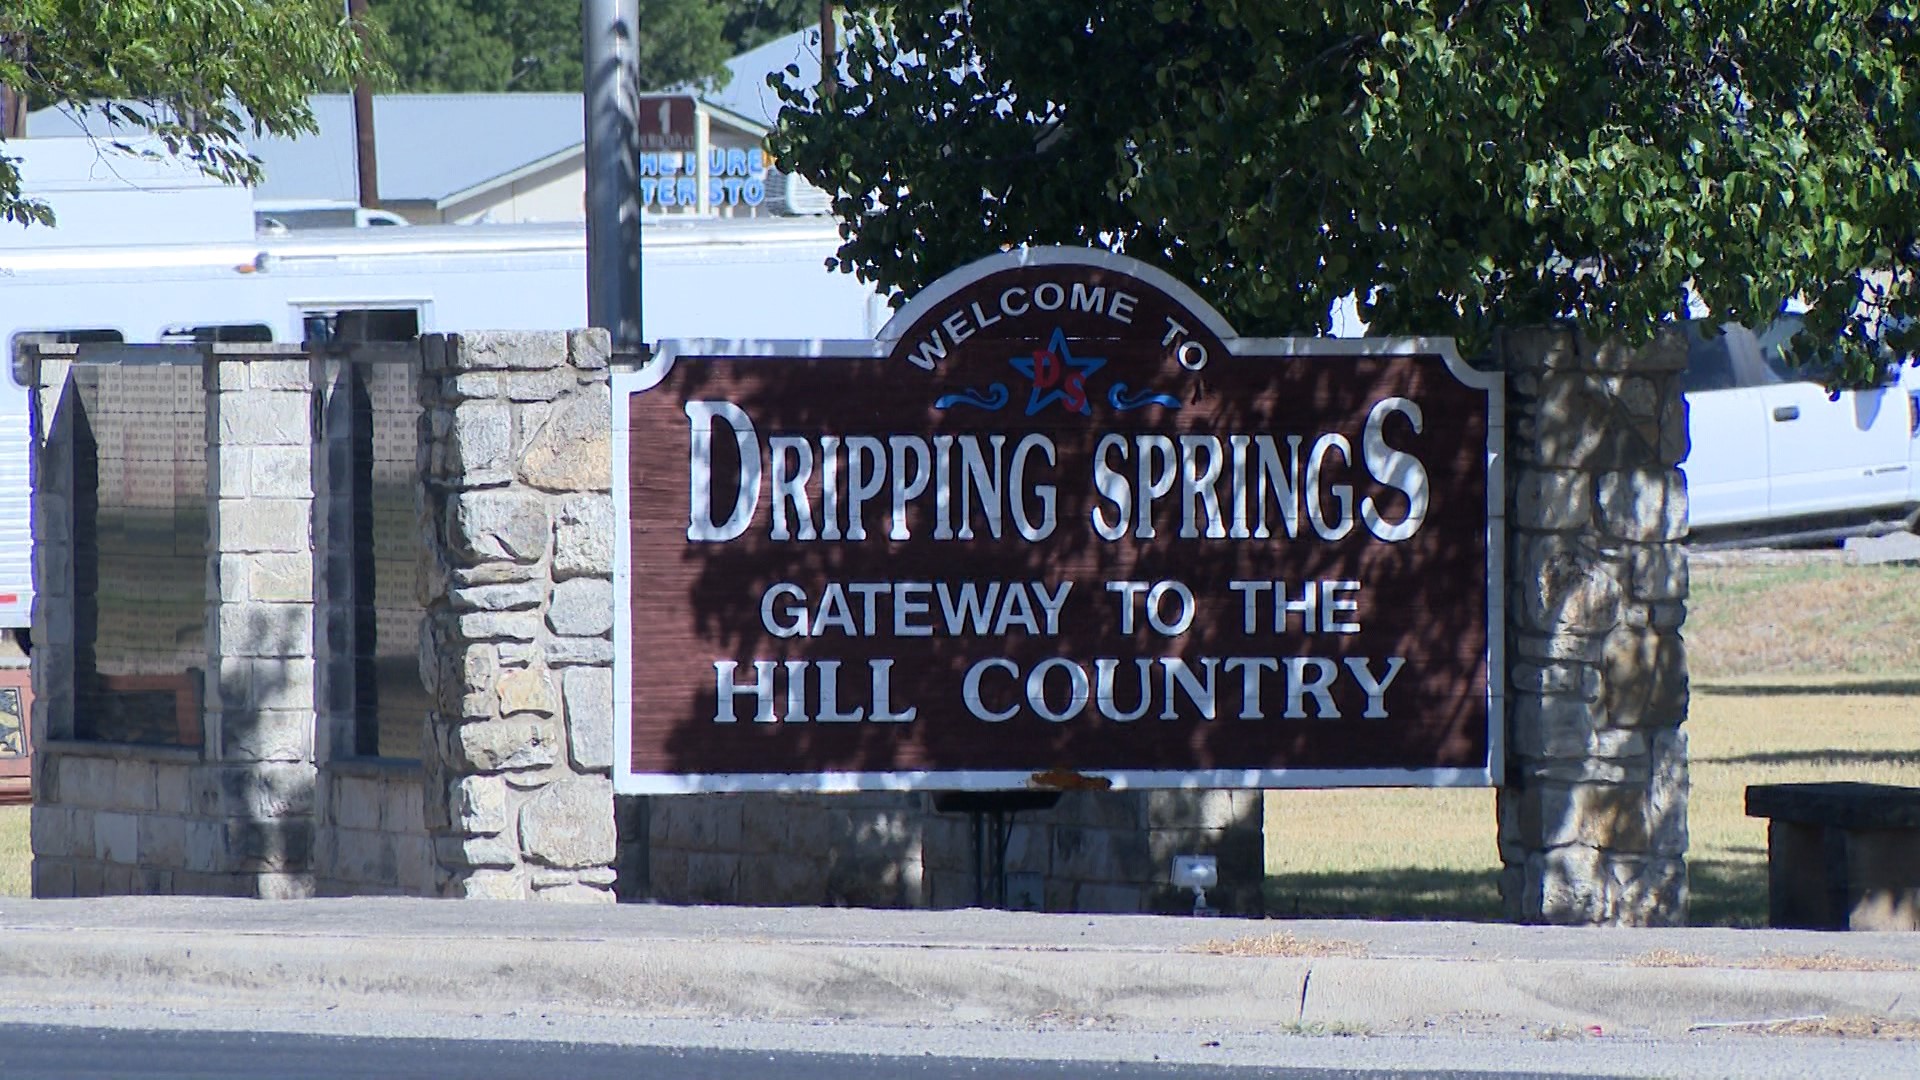 City leaders and business owners in Dripping Springs are balancing exponential growth, while also trying to keep the small town charm that has existed for decades.